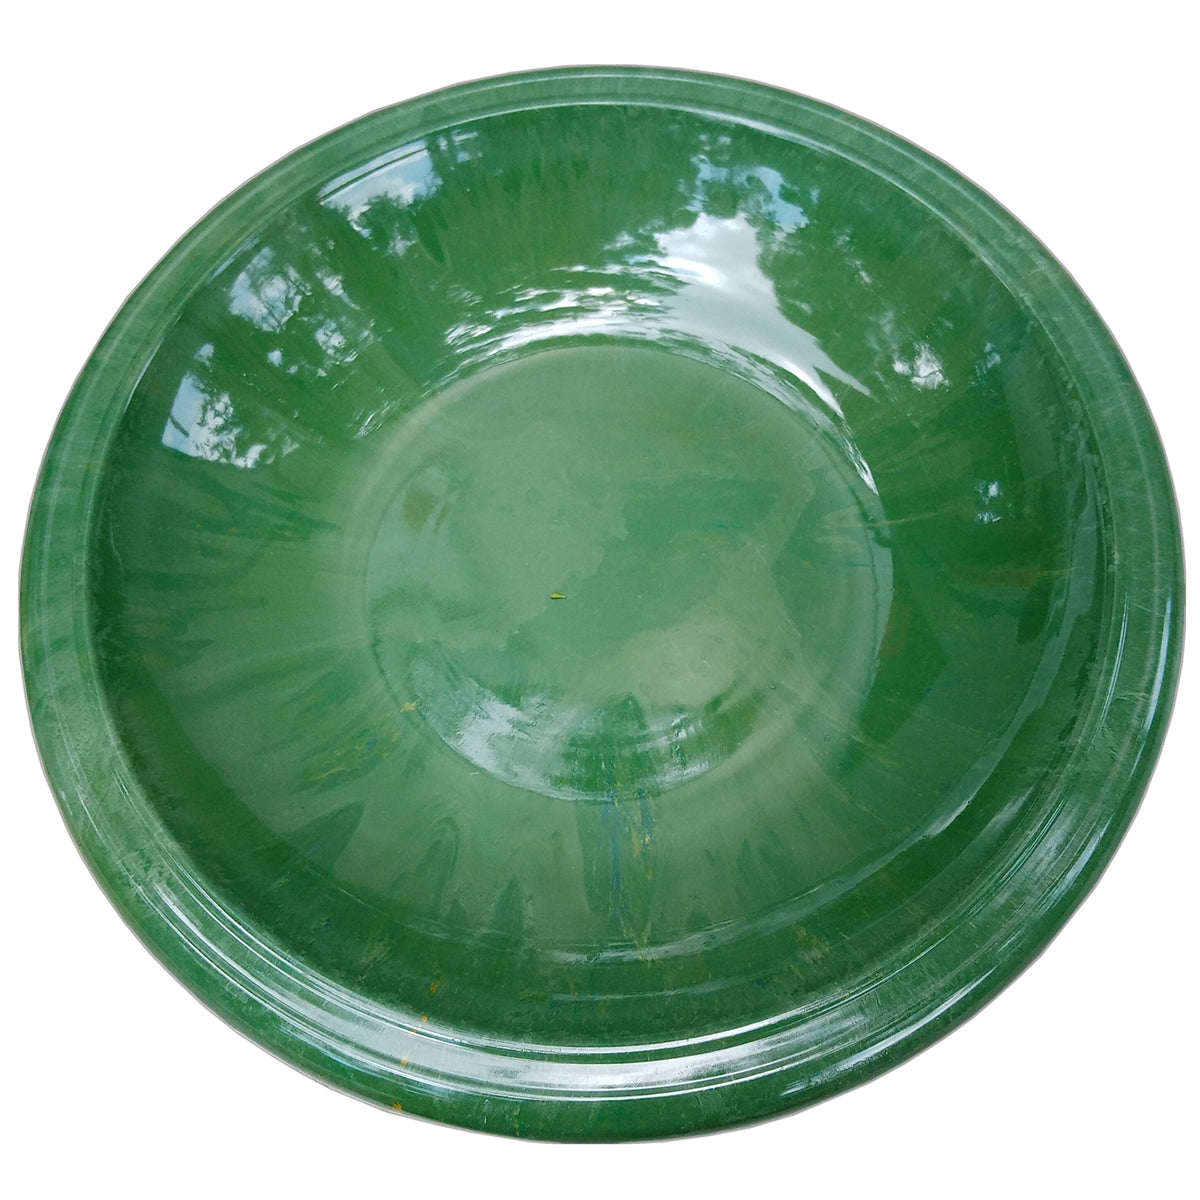 Dia Kale Green Fiber Clay Birdbath Bowl. Made of clay, plastic, and fiber. Impact and shatter-resistant. UV protection. 19"D, 5 lbs.